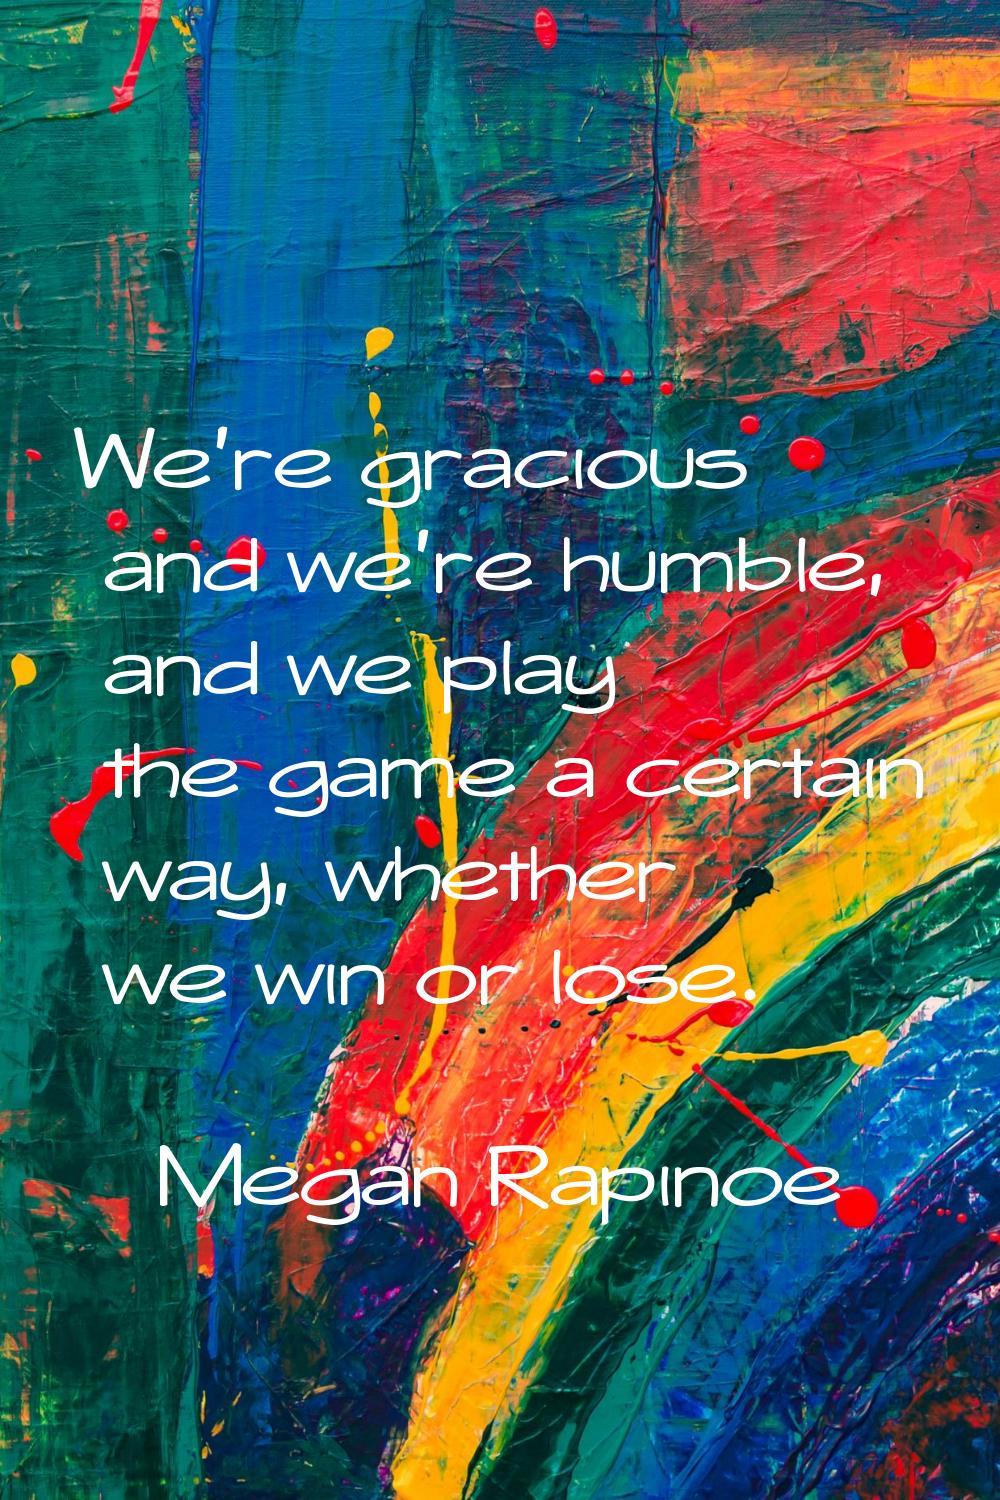 We're gracious and we're humble, and we play the game a certain way, whether we win or lose.